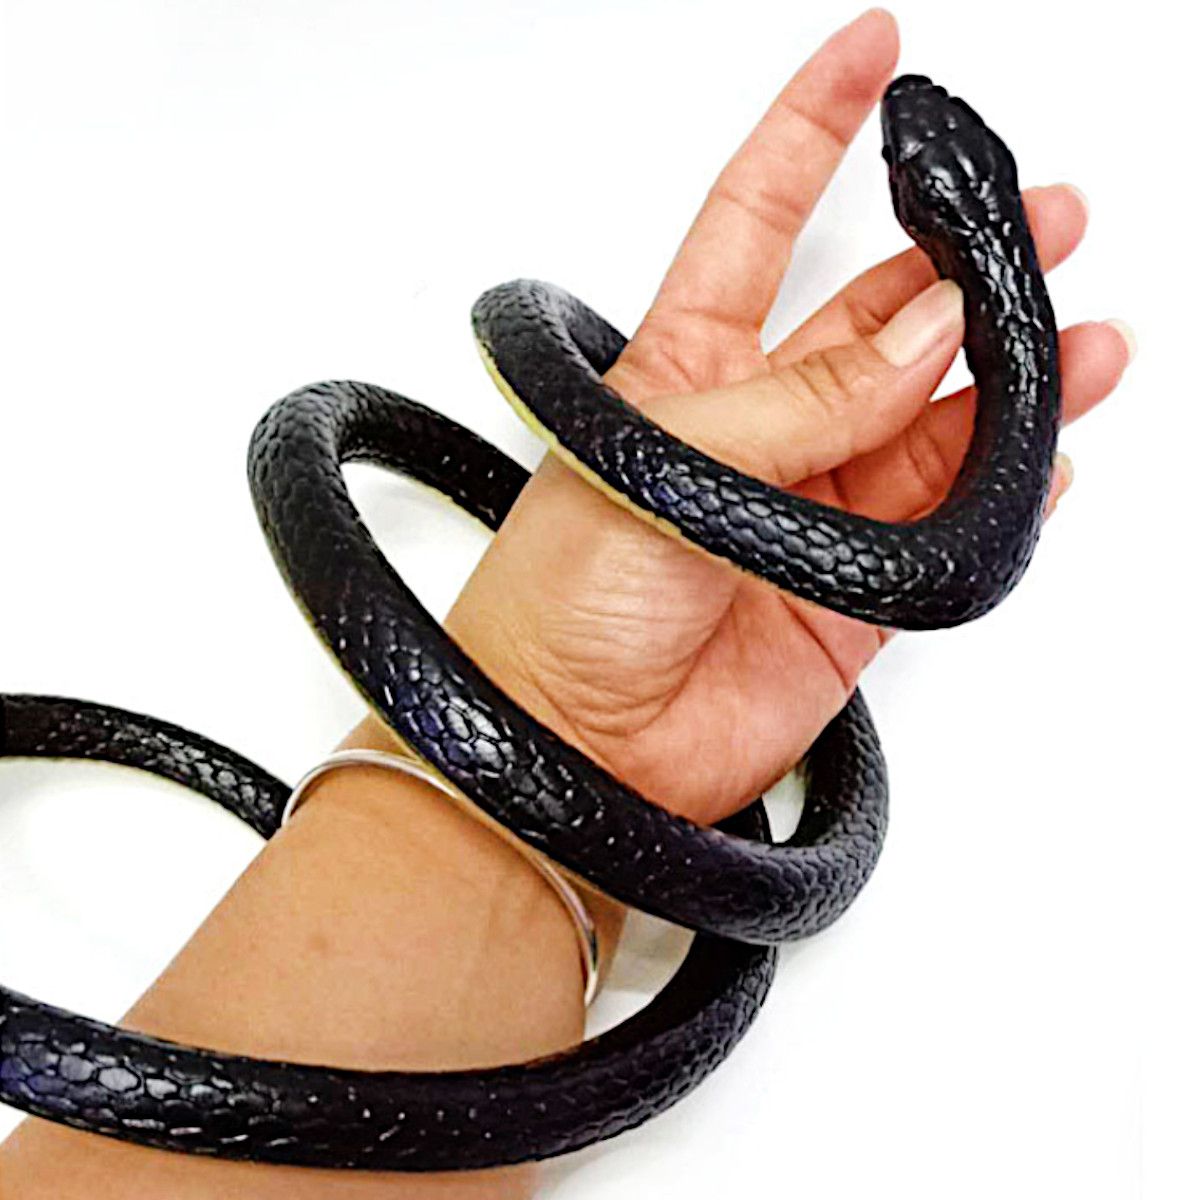 130cm-Realistic-Snake-Rattlesnake-Trick-Terrifying-Mischief-Rubber-Scary-Decorations-1554281